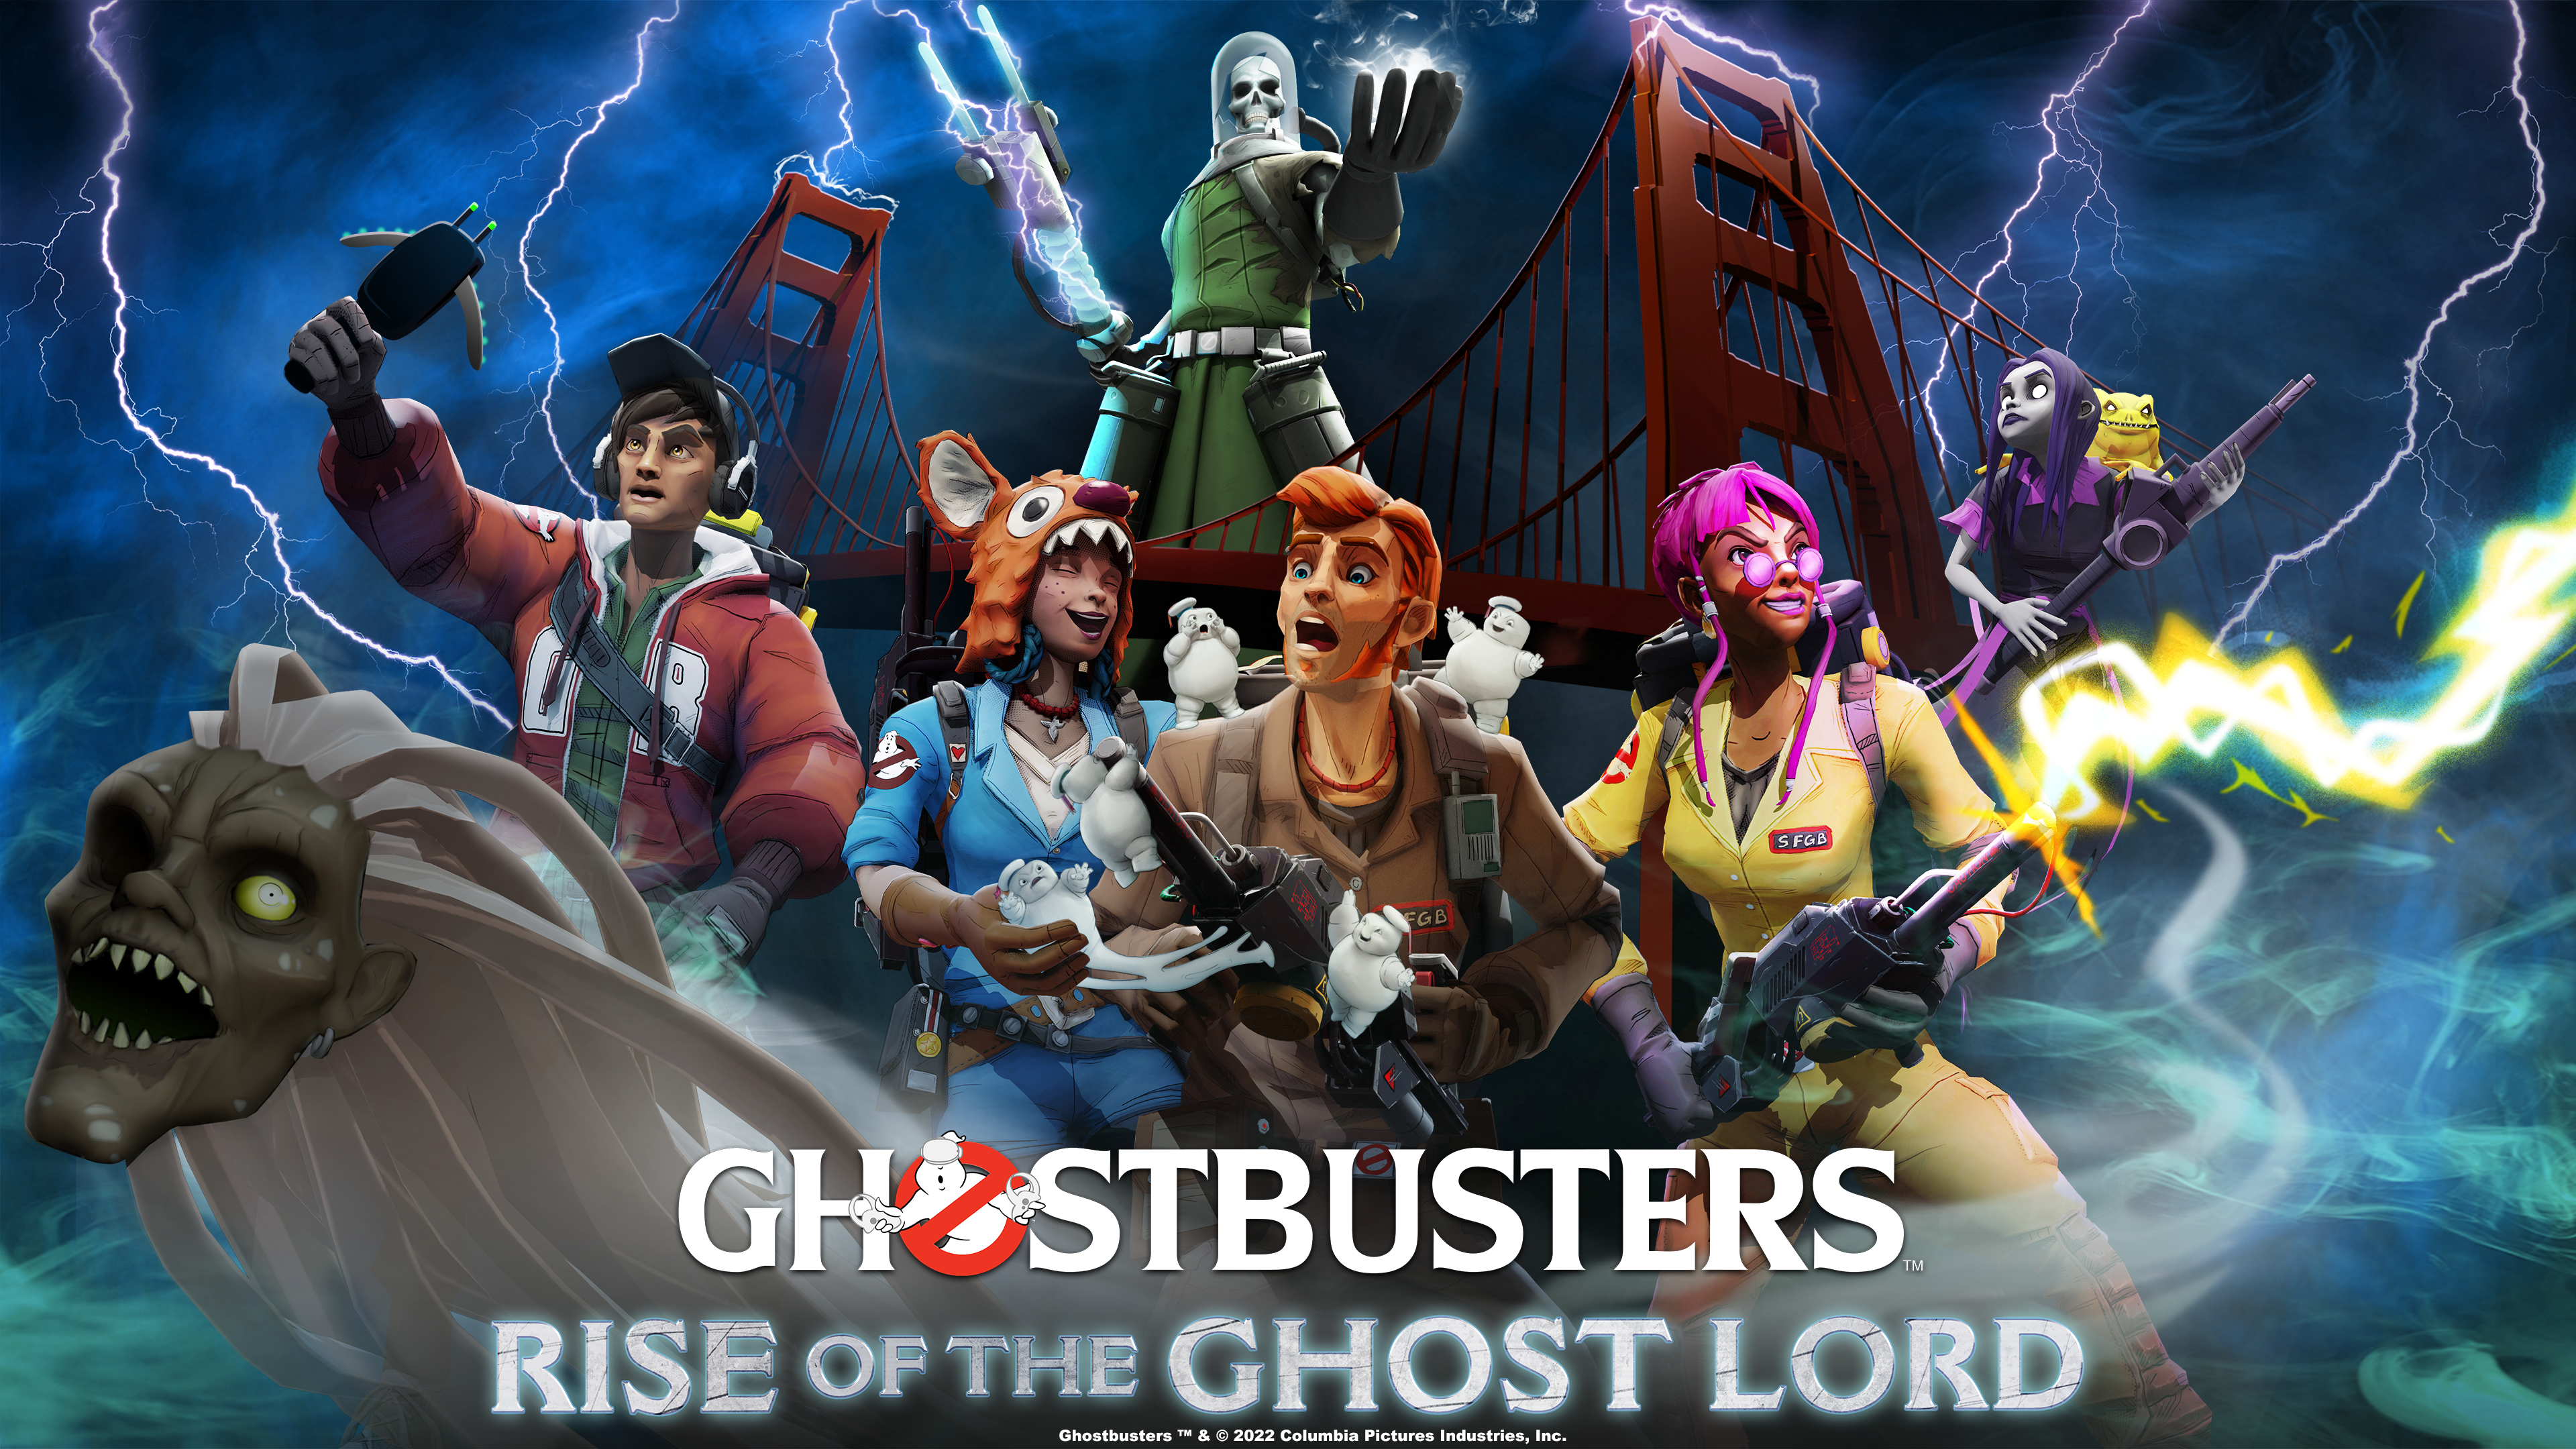 Ghostbusters: Rise of the Ghost Lord's Keyart officiel |  Image : Sony Pictures RV